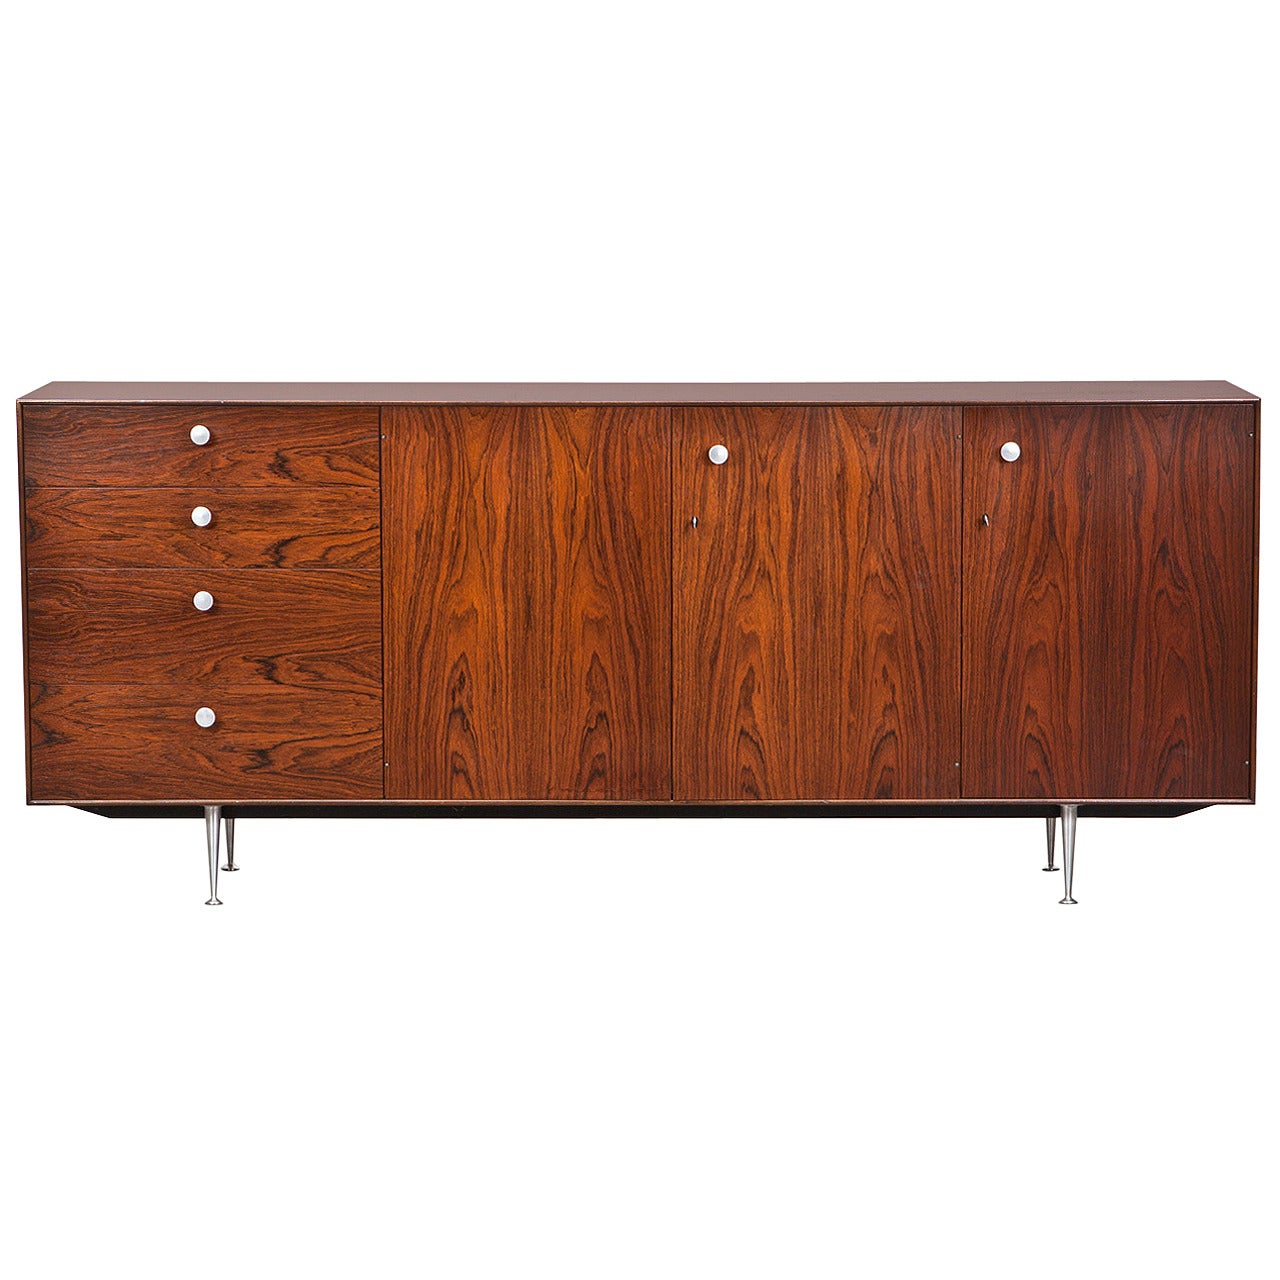 1950s Brown Wooden Credenza by George Nelson